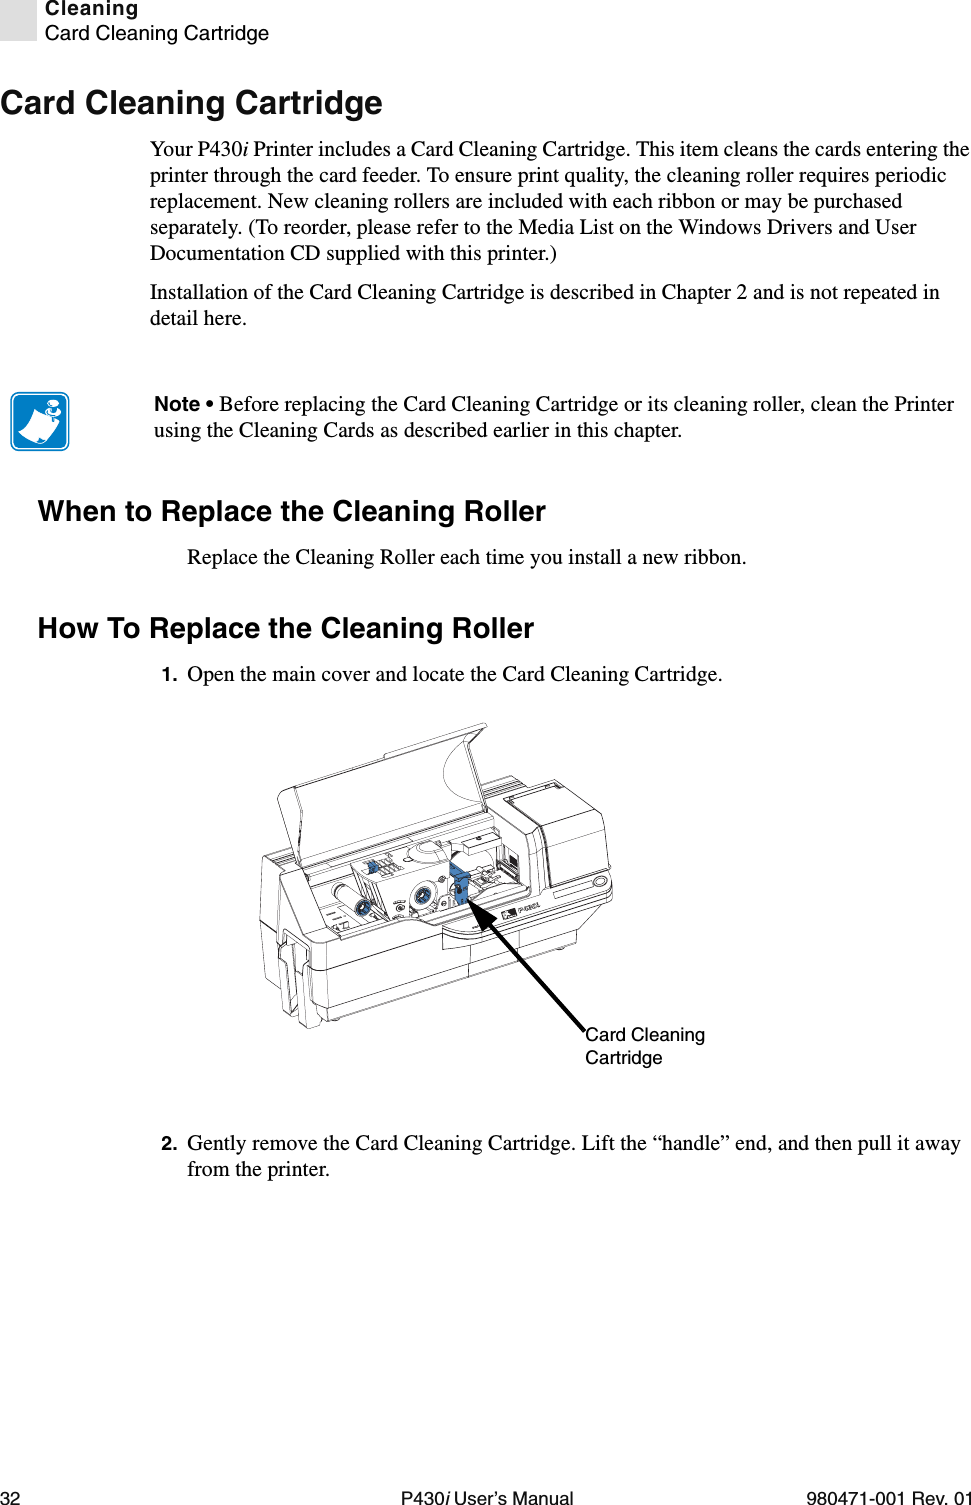 32 P430i User’s Manual 980471-001 Rev. 01CleaningCard Cleaning CartridgeCard Cleaning CartridgeYour P430i Printer includes a Card Cleaning Cartridge. This item cleans the cards entering the printer through the card feeder. To ensure print quality, the cleaning roller requires periodic replacement. New cleaning rollers are included with each ribbon or may be purchased separately. (To reorder, please refer to the Media List on the Windows Drivers and User Documentation CD supplied with this printer.)Installation of the Card Cleaning Cartridge is described in Chapter 2 and is not repeated in detail here.When to Replace the Cleaning RollerReplace the Cleaning Roller each time you install a new ribbon.How To Replace the Cleaning Roller1. Open the main cover and locate the Card Cleaning Cartridge.2. Gently remove the Card Cleaning Cartridge. Lift the “handle” end, and then pull it away from the printer.Note • Before replacing the Card Cleaning Cartridge or its cleaning roller, clean the Printer using the Cleaning Cards as described earlier in this chapter.Dual-Sided ColorCard Cleaning Cartridge